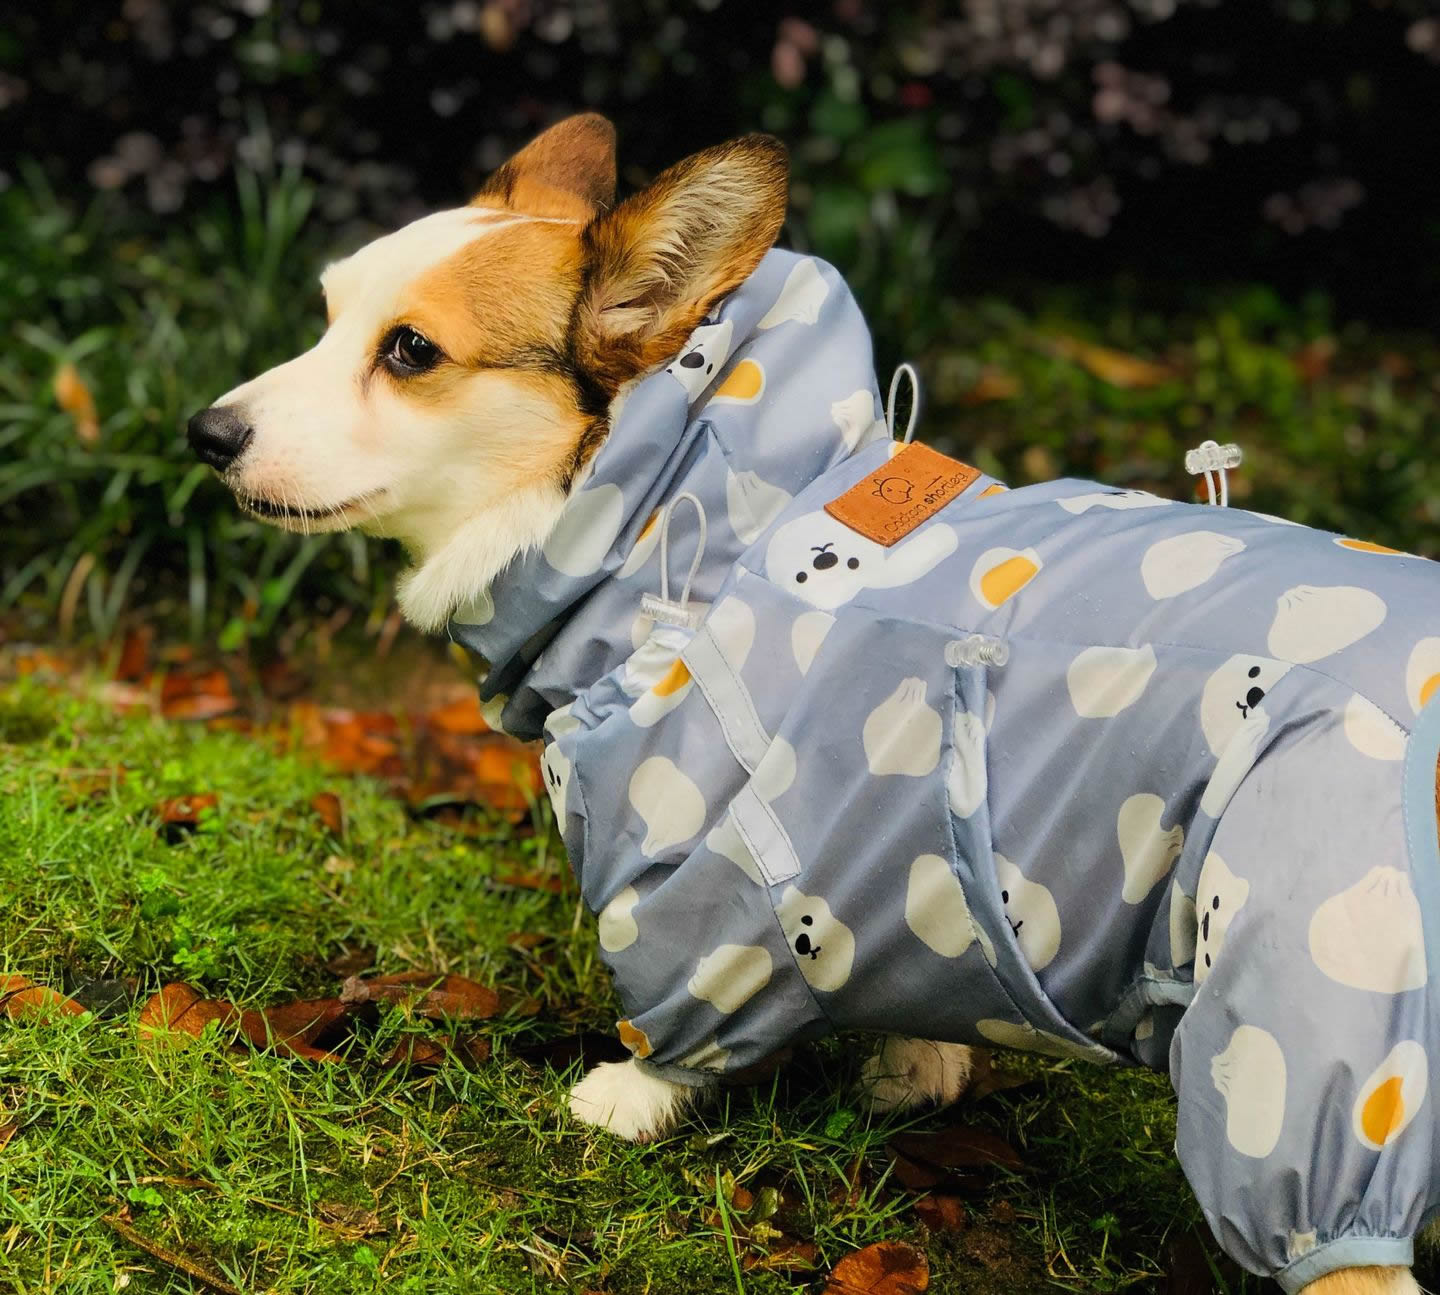 Gorgeous rain suit for cute Welsh Corgi. For them a custom-made and super colorful model!